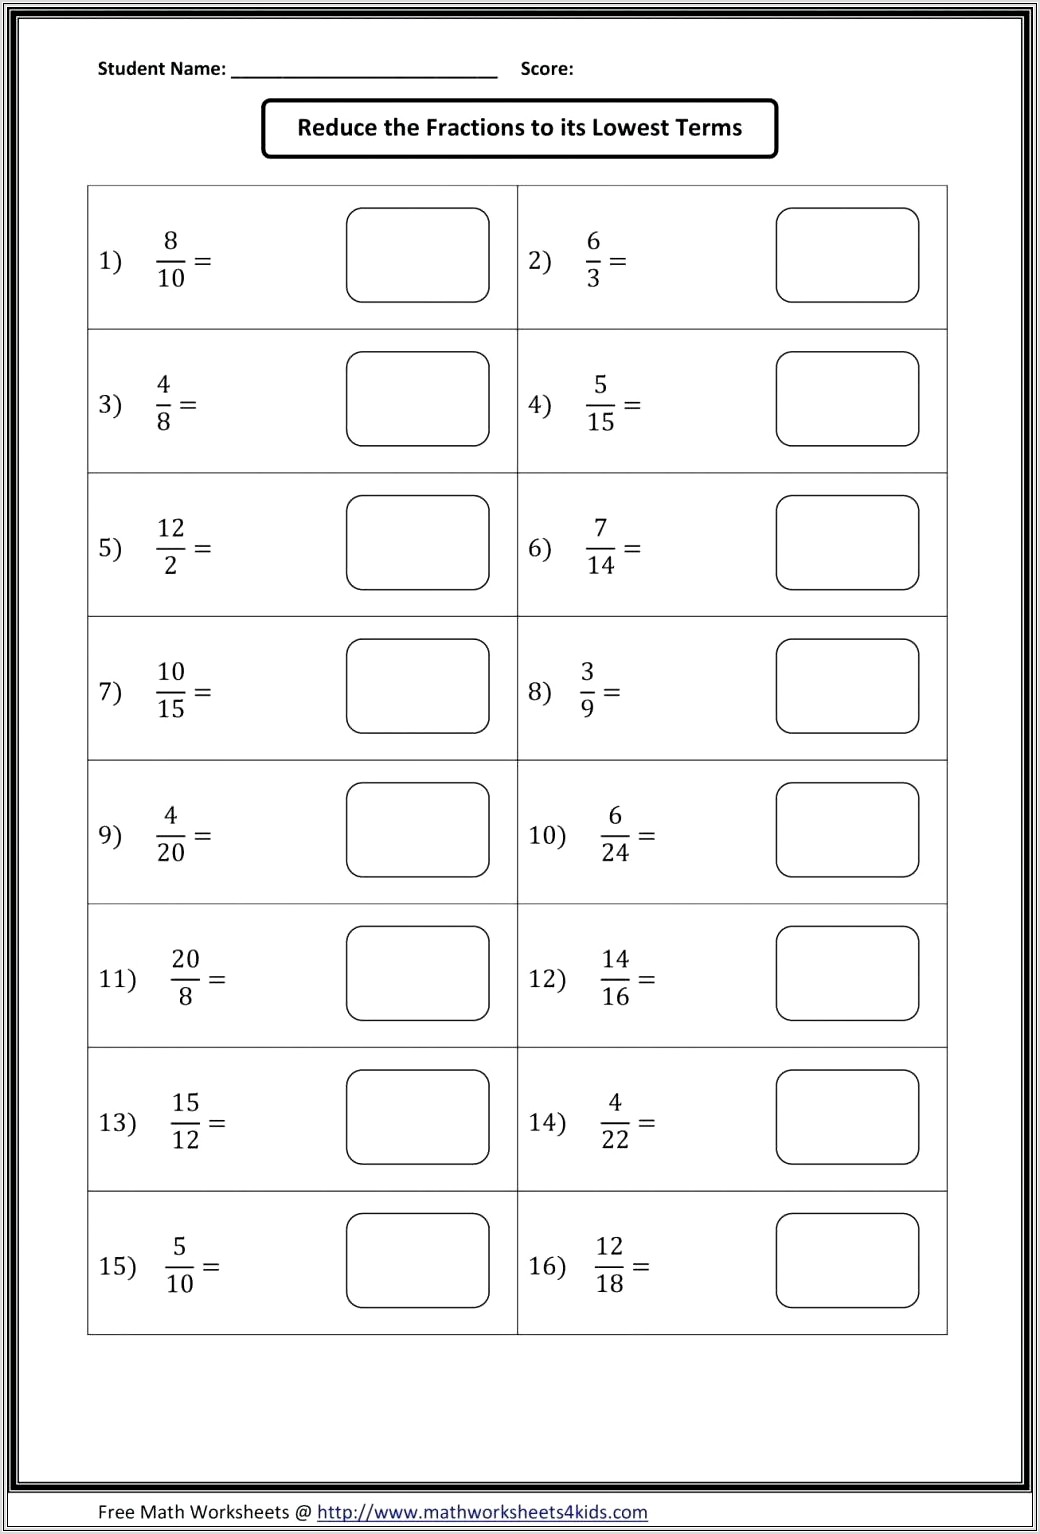 Imaginary Numbers Worksheet With Answers